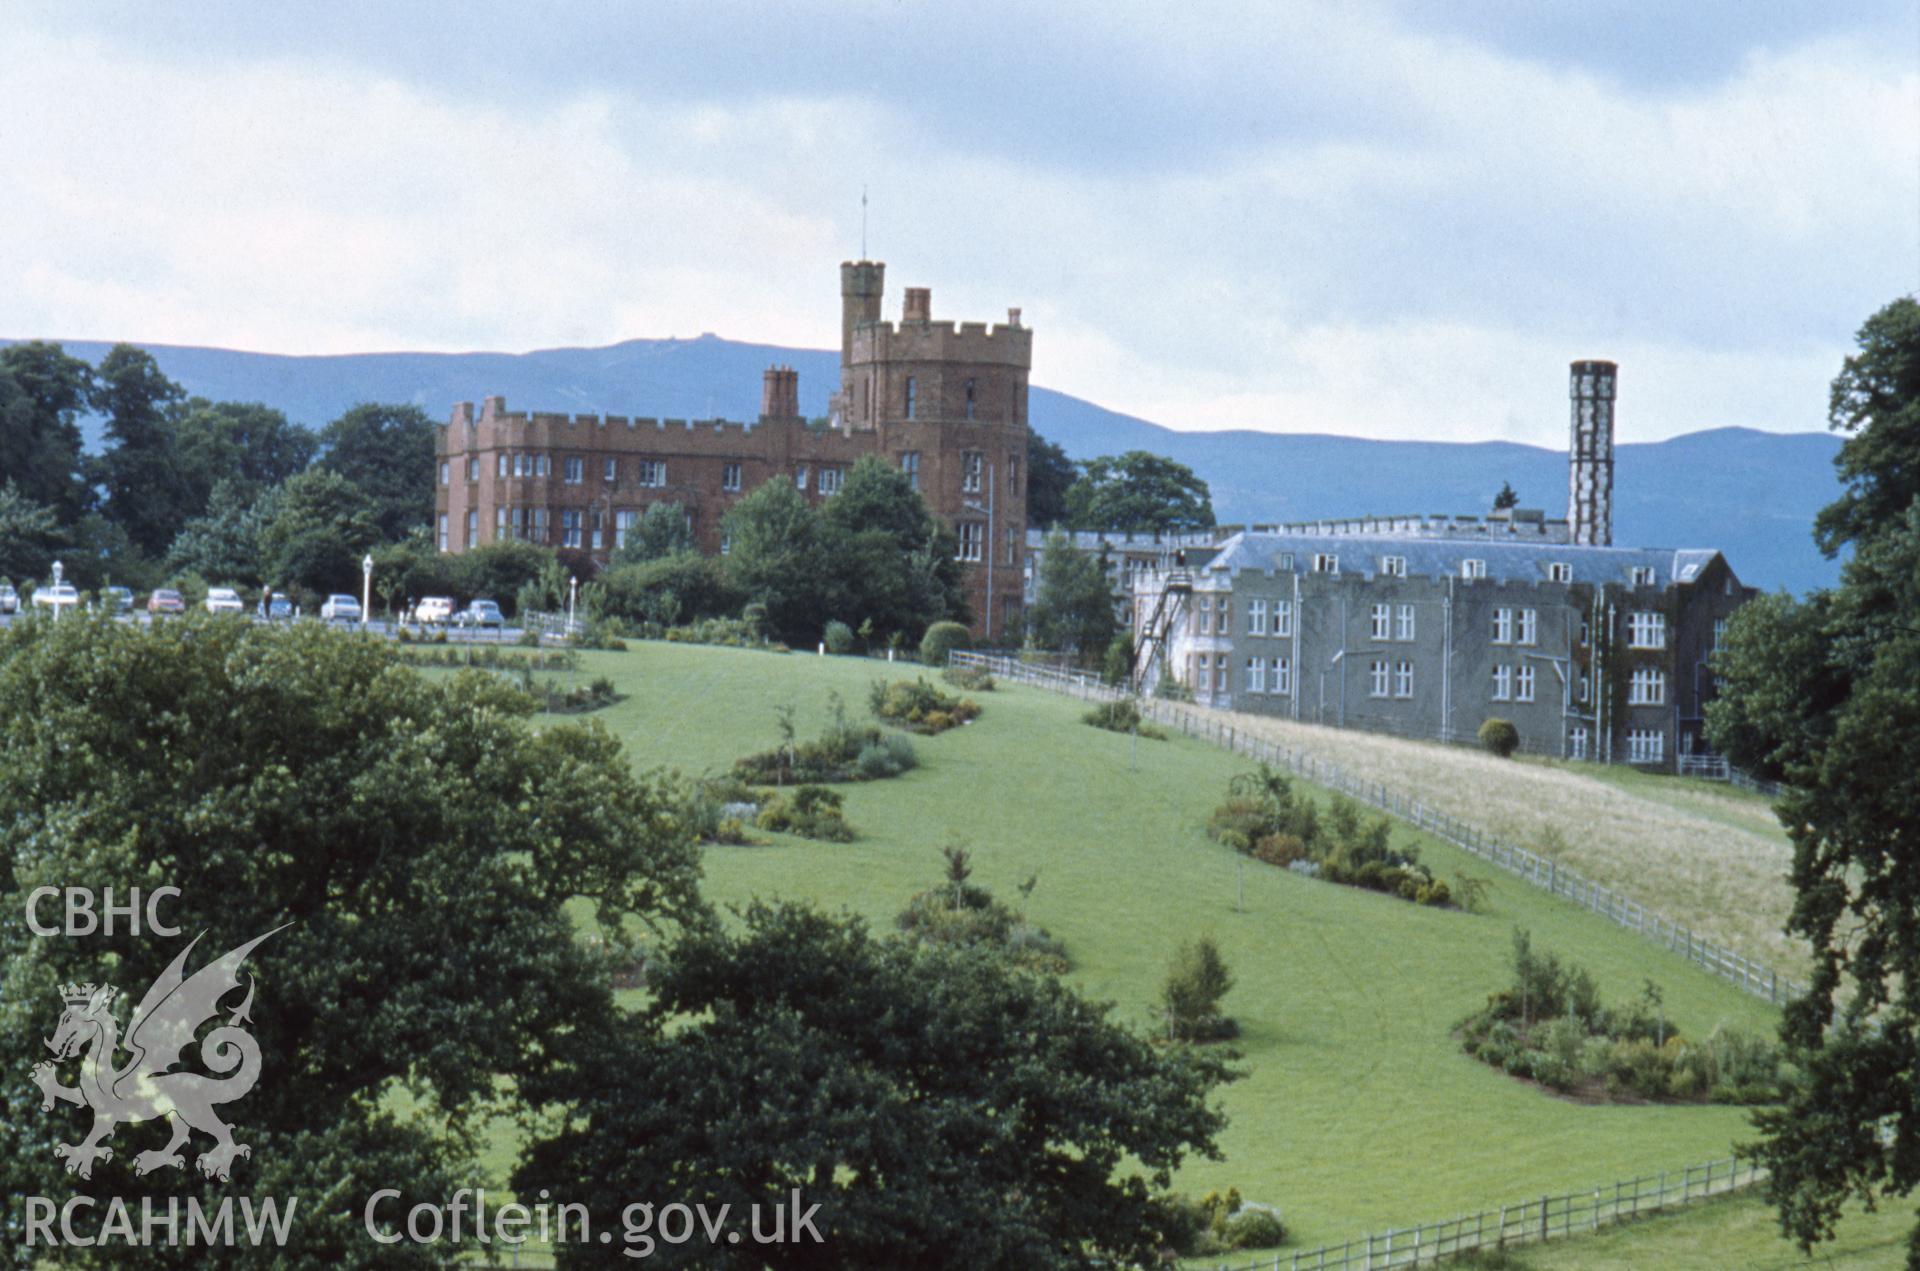 1 colour transparency showing view of Ruthin Castle, undated; collated by the former Central Office of Information.